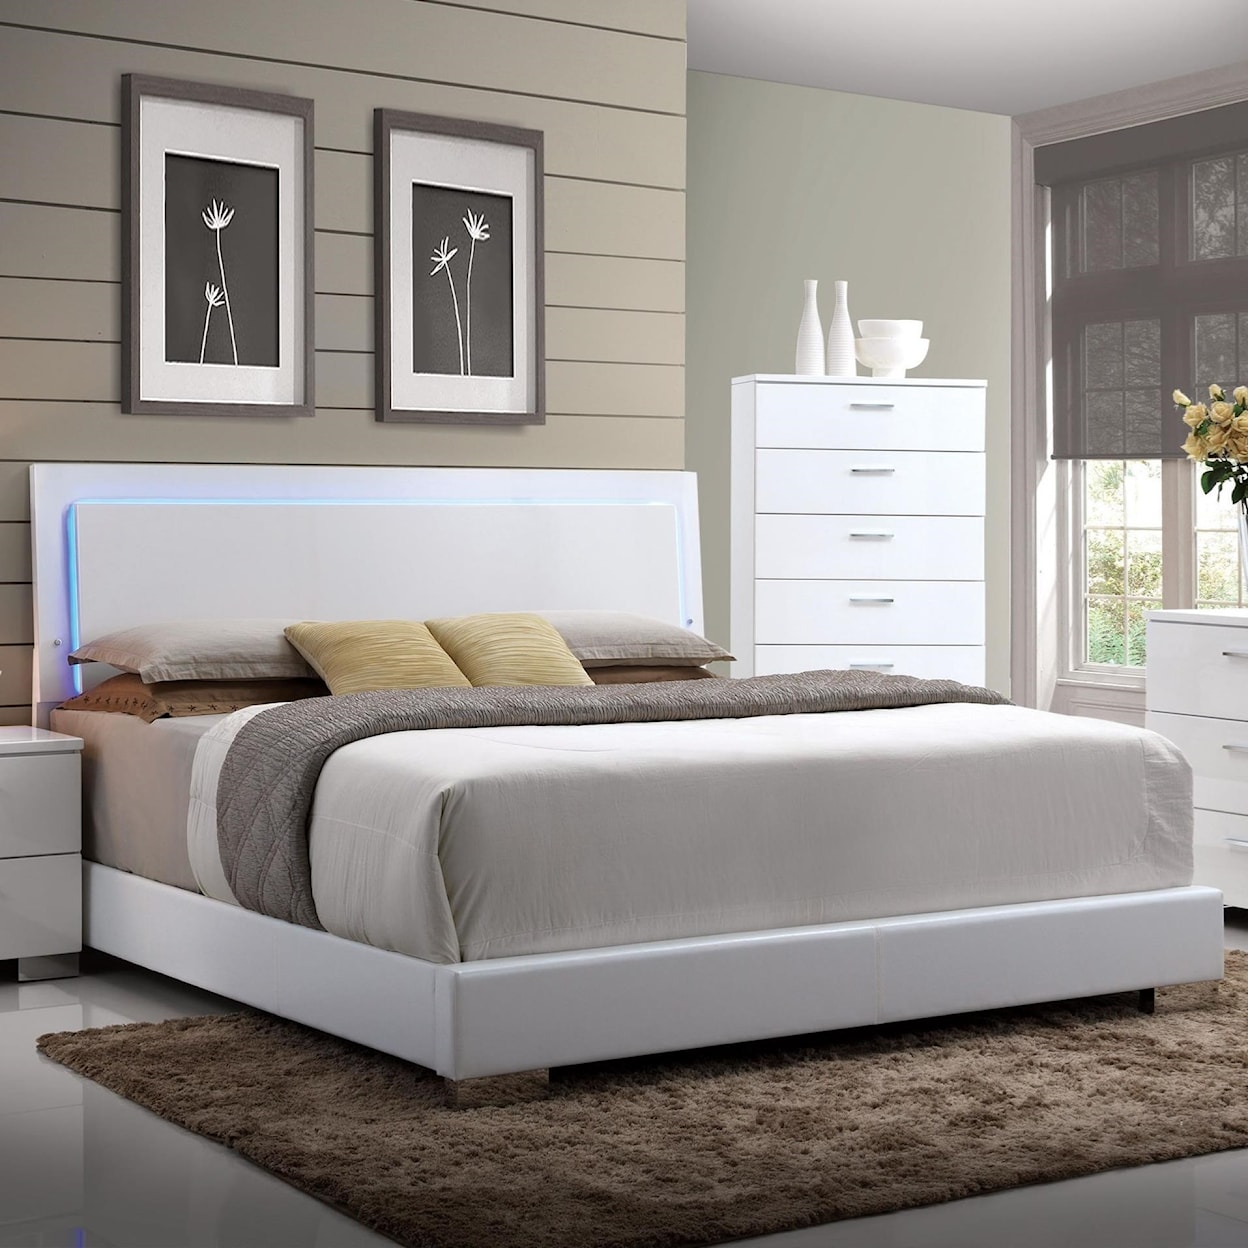 Acme Furniture Lorimar (LED) Queen Bed (HB w/LED)